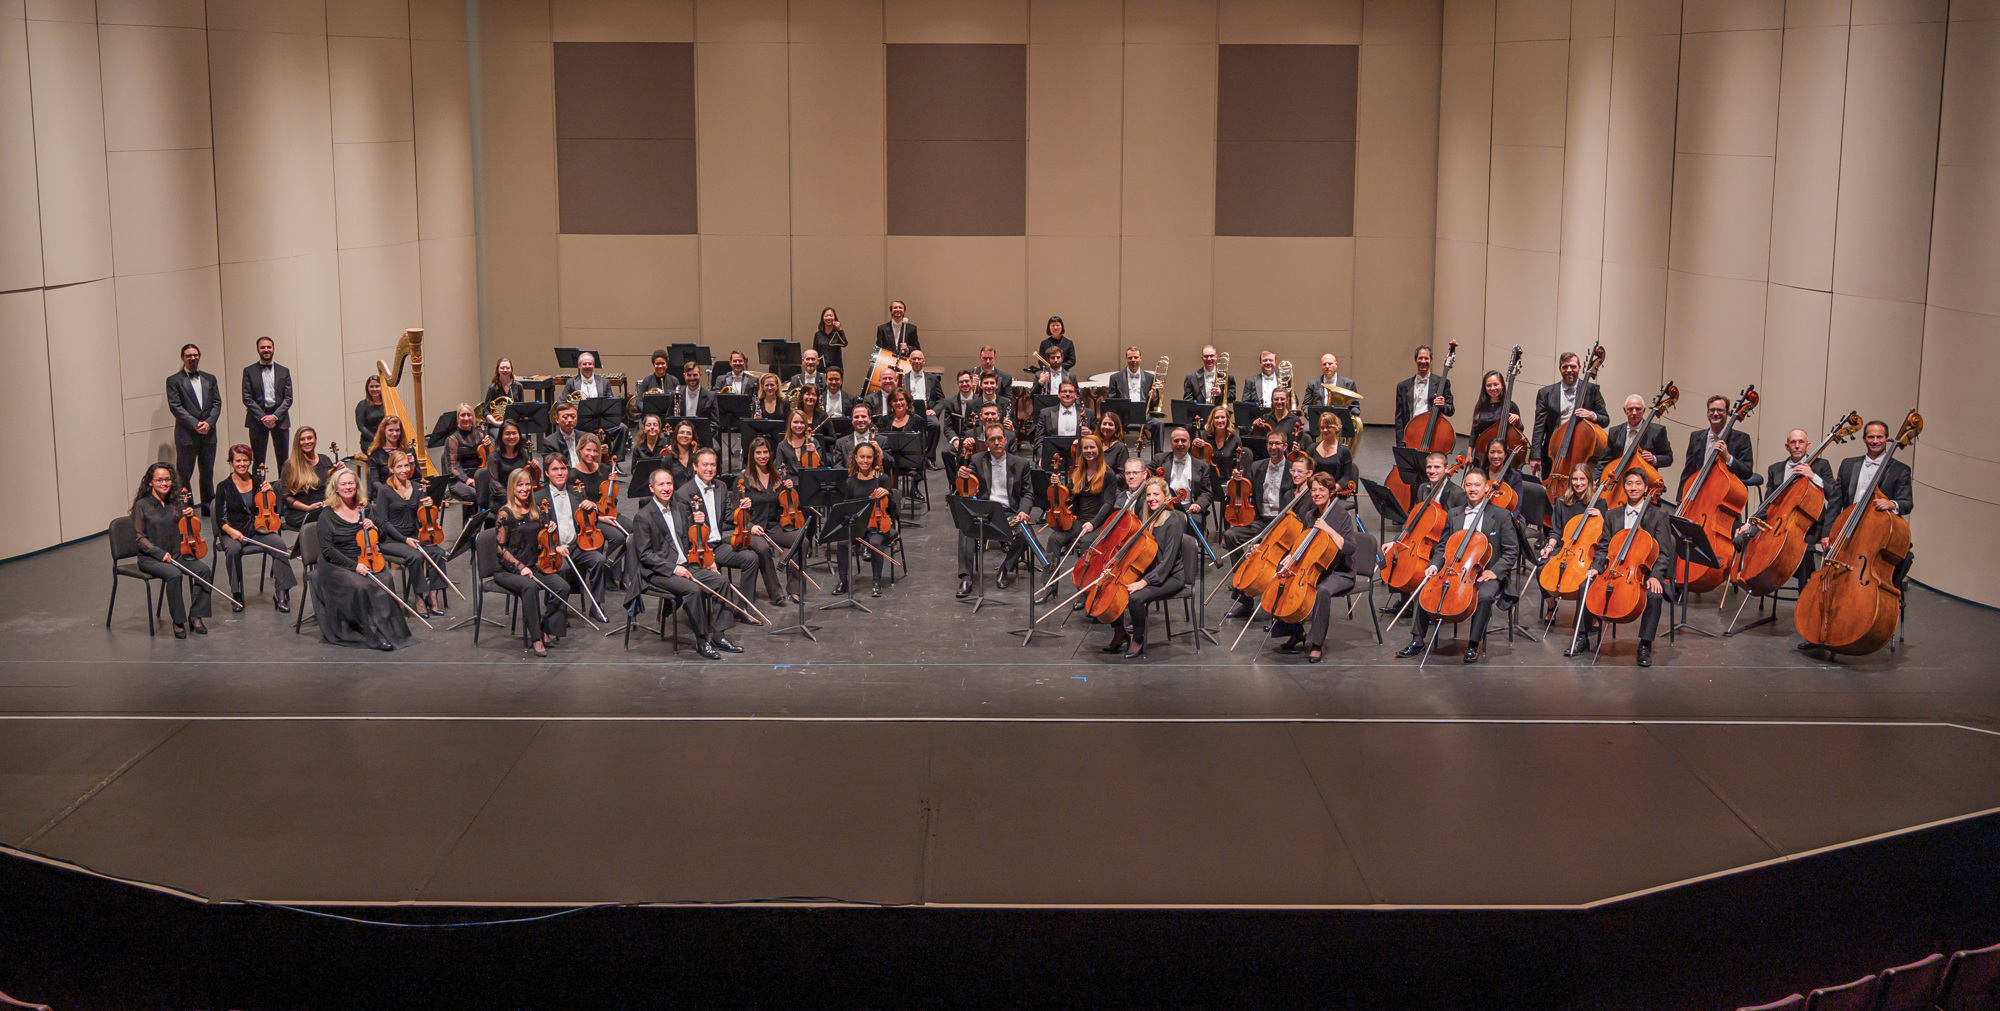 Sarasota Orchestra is primed for another full season of music. (Courtesy photo)